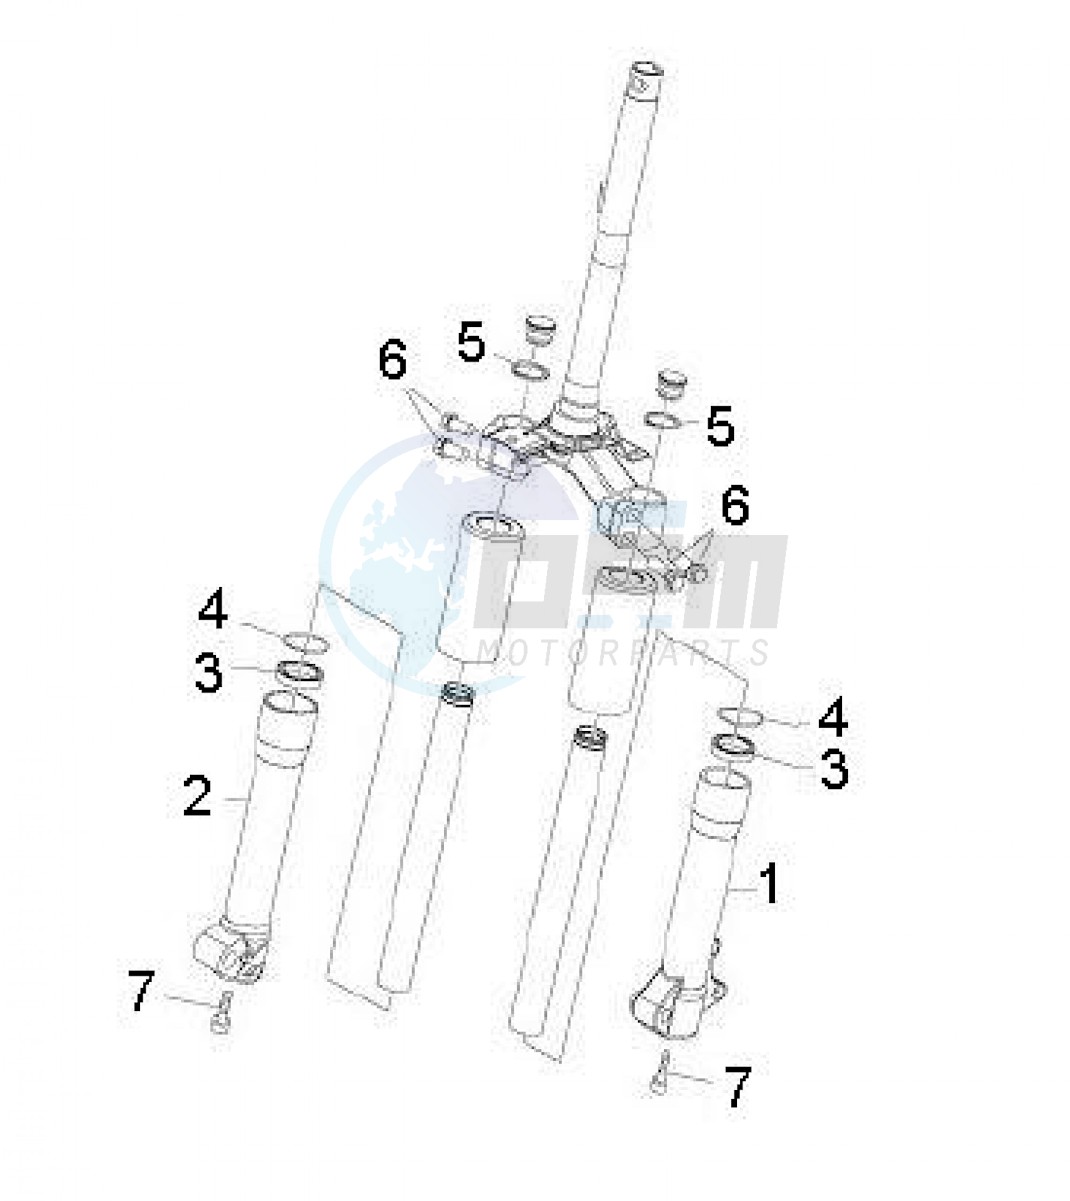 Front fork components Wuxi Top (Positions) blueprint